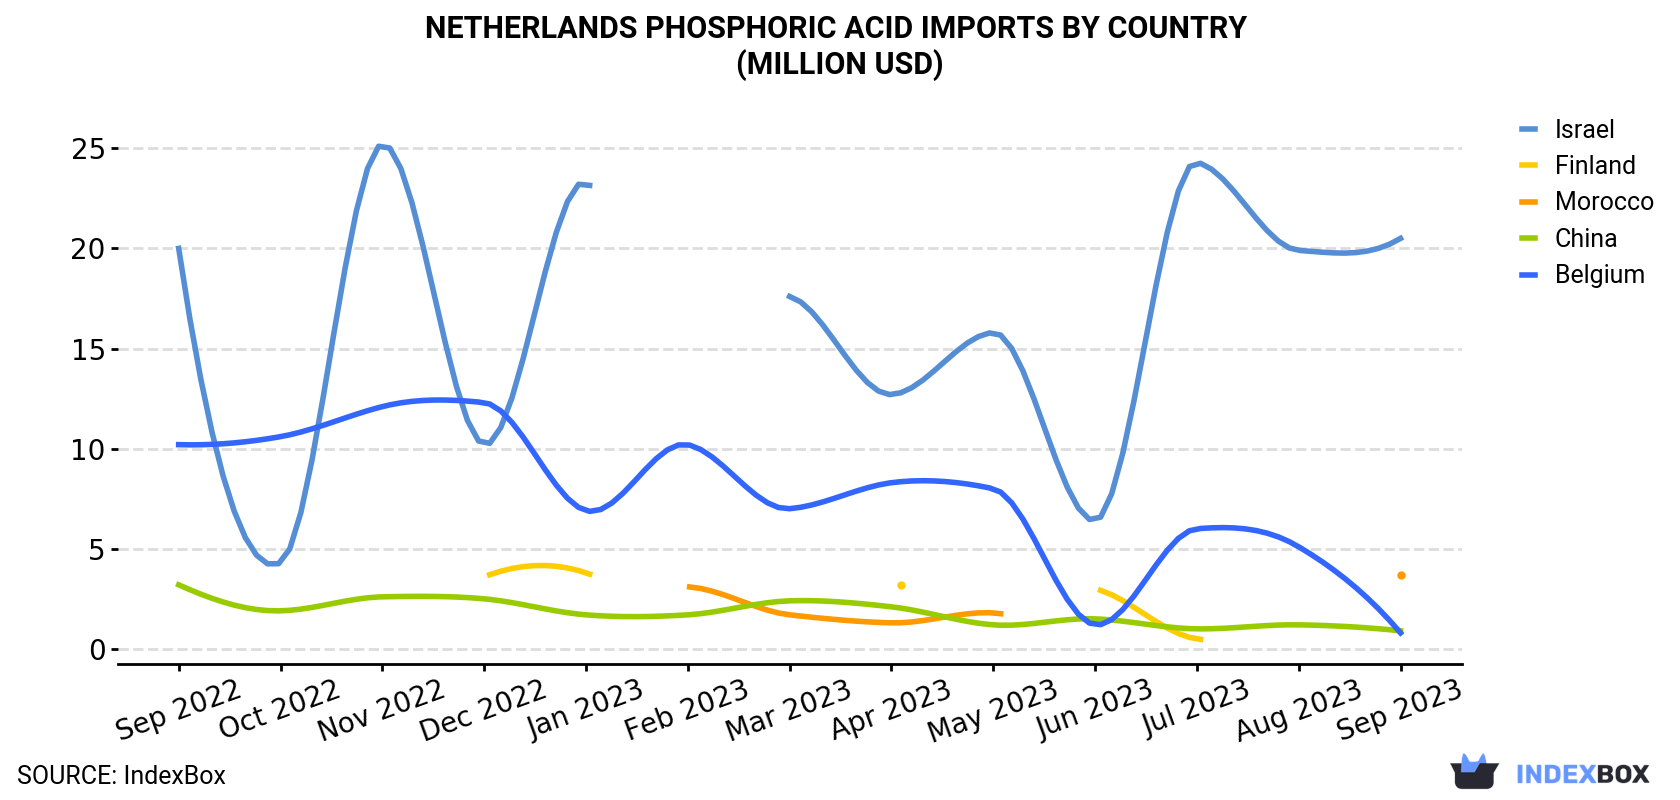 Netherlands Phosphoric Acid Imports By Country (Million USD)